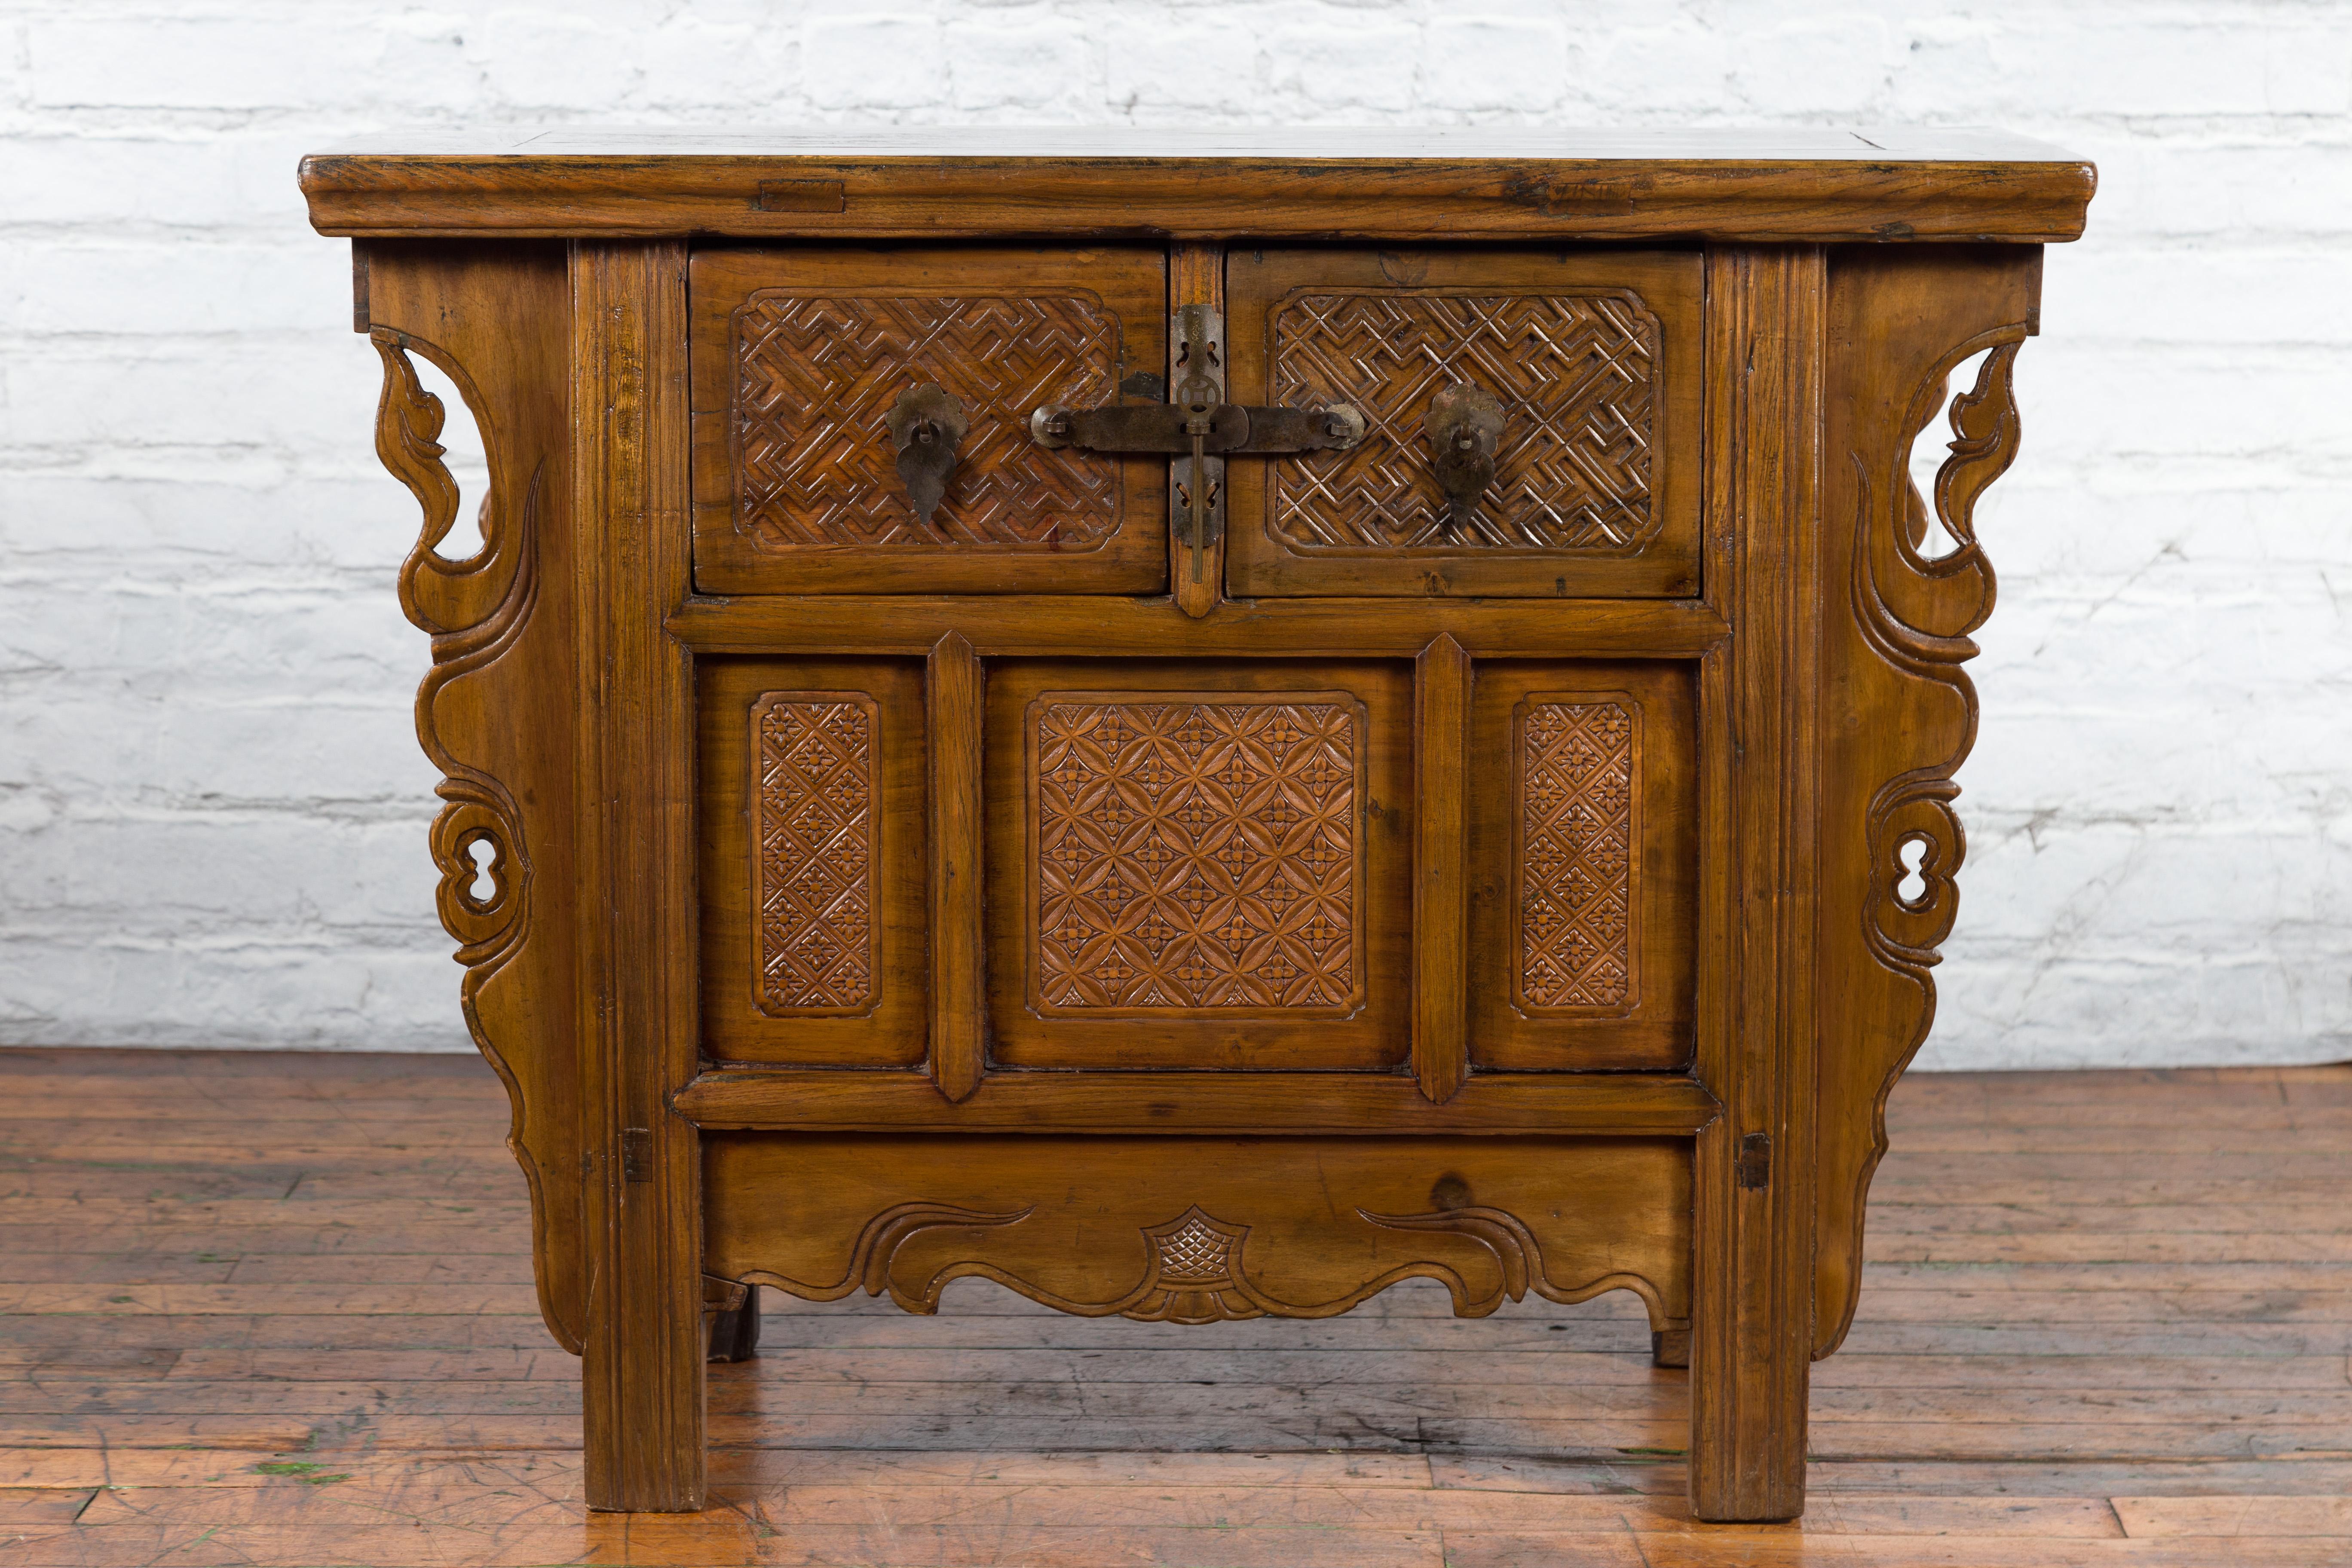 A Chinese Qing Dynasty period carved altar coffer from the 19th century, with two drawers and geometric motifs. Created in China during the Qing Dynasty, this altar coffer features a rectangular top with central board, sitting above two dovetailed